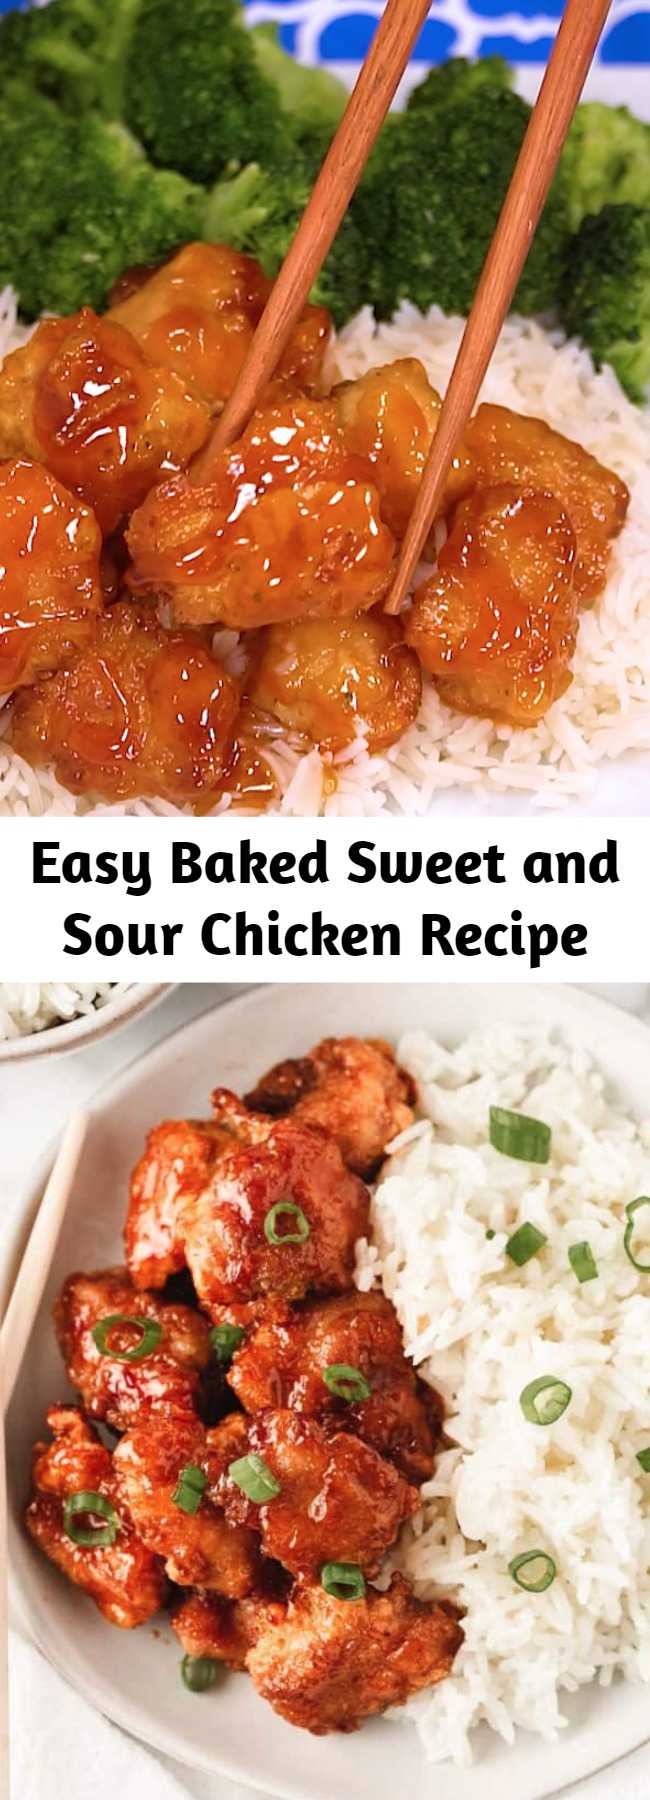 Easy Baked Sweet and Sour Chicken Recipe - Skip the take out and make this delicious sweet and sour chicken recipe at home! The sauce is absolutely to die for. Serve with rice and fresh vegetables for the perfect dinner! #chicken #recipe #sweetandsour #sauce #baked #fried #crispy #chinese